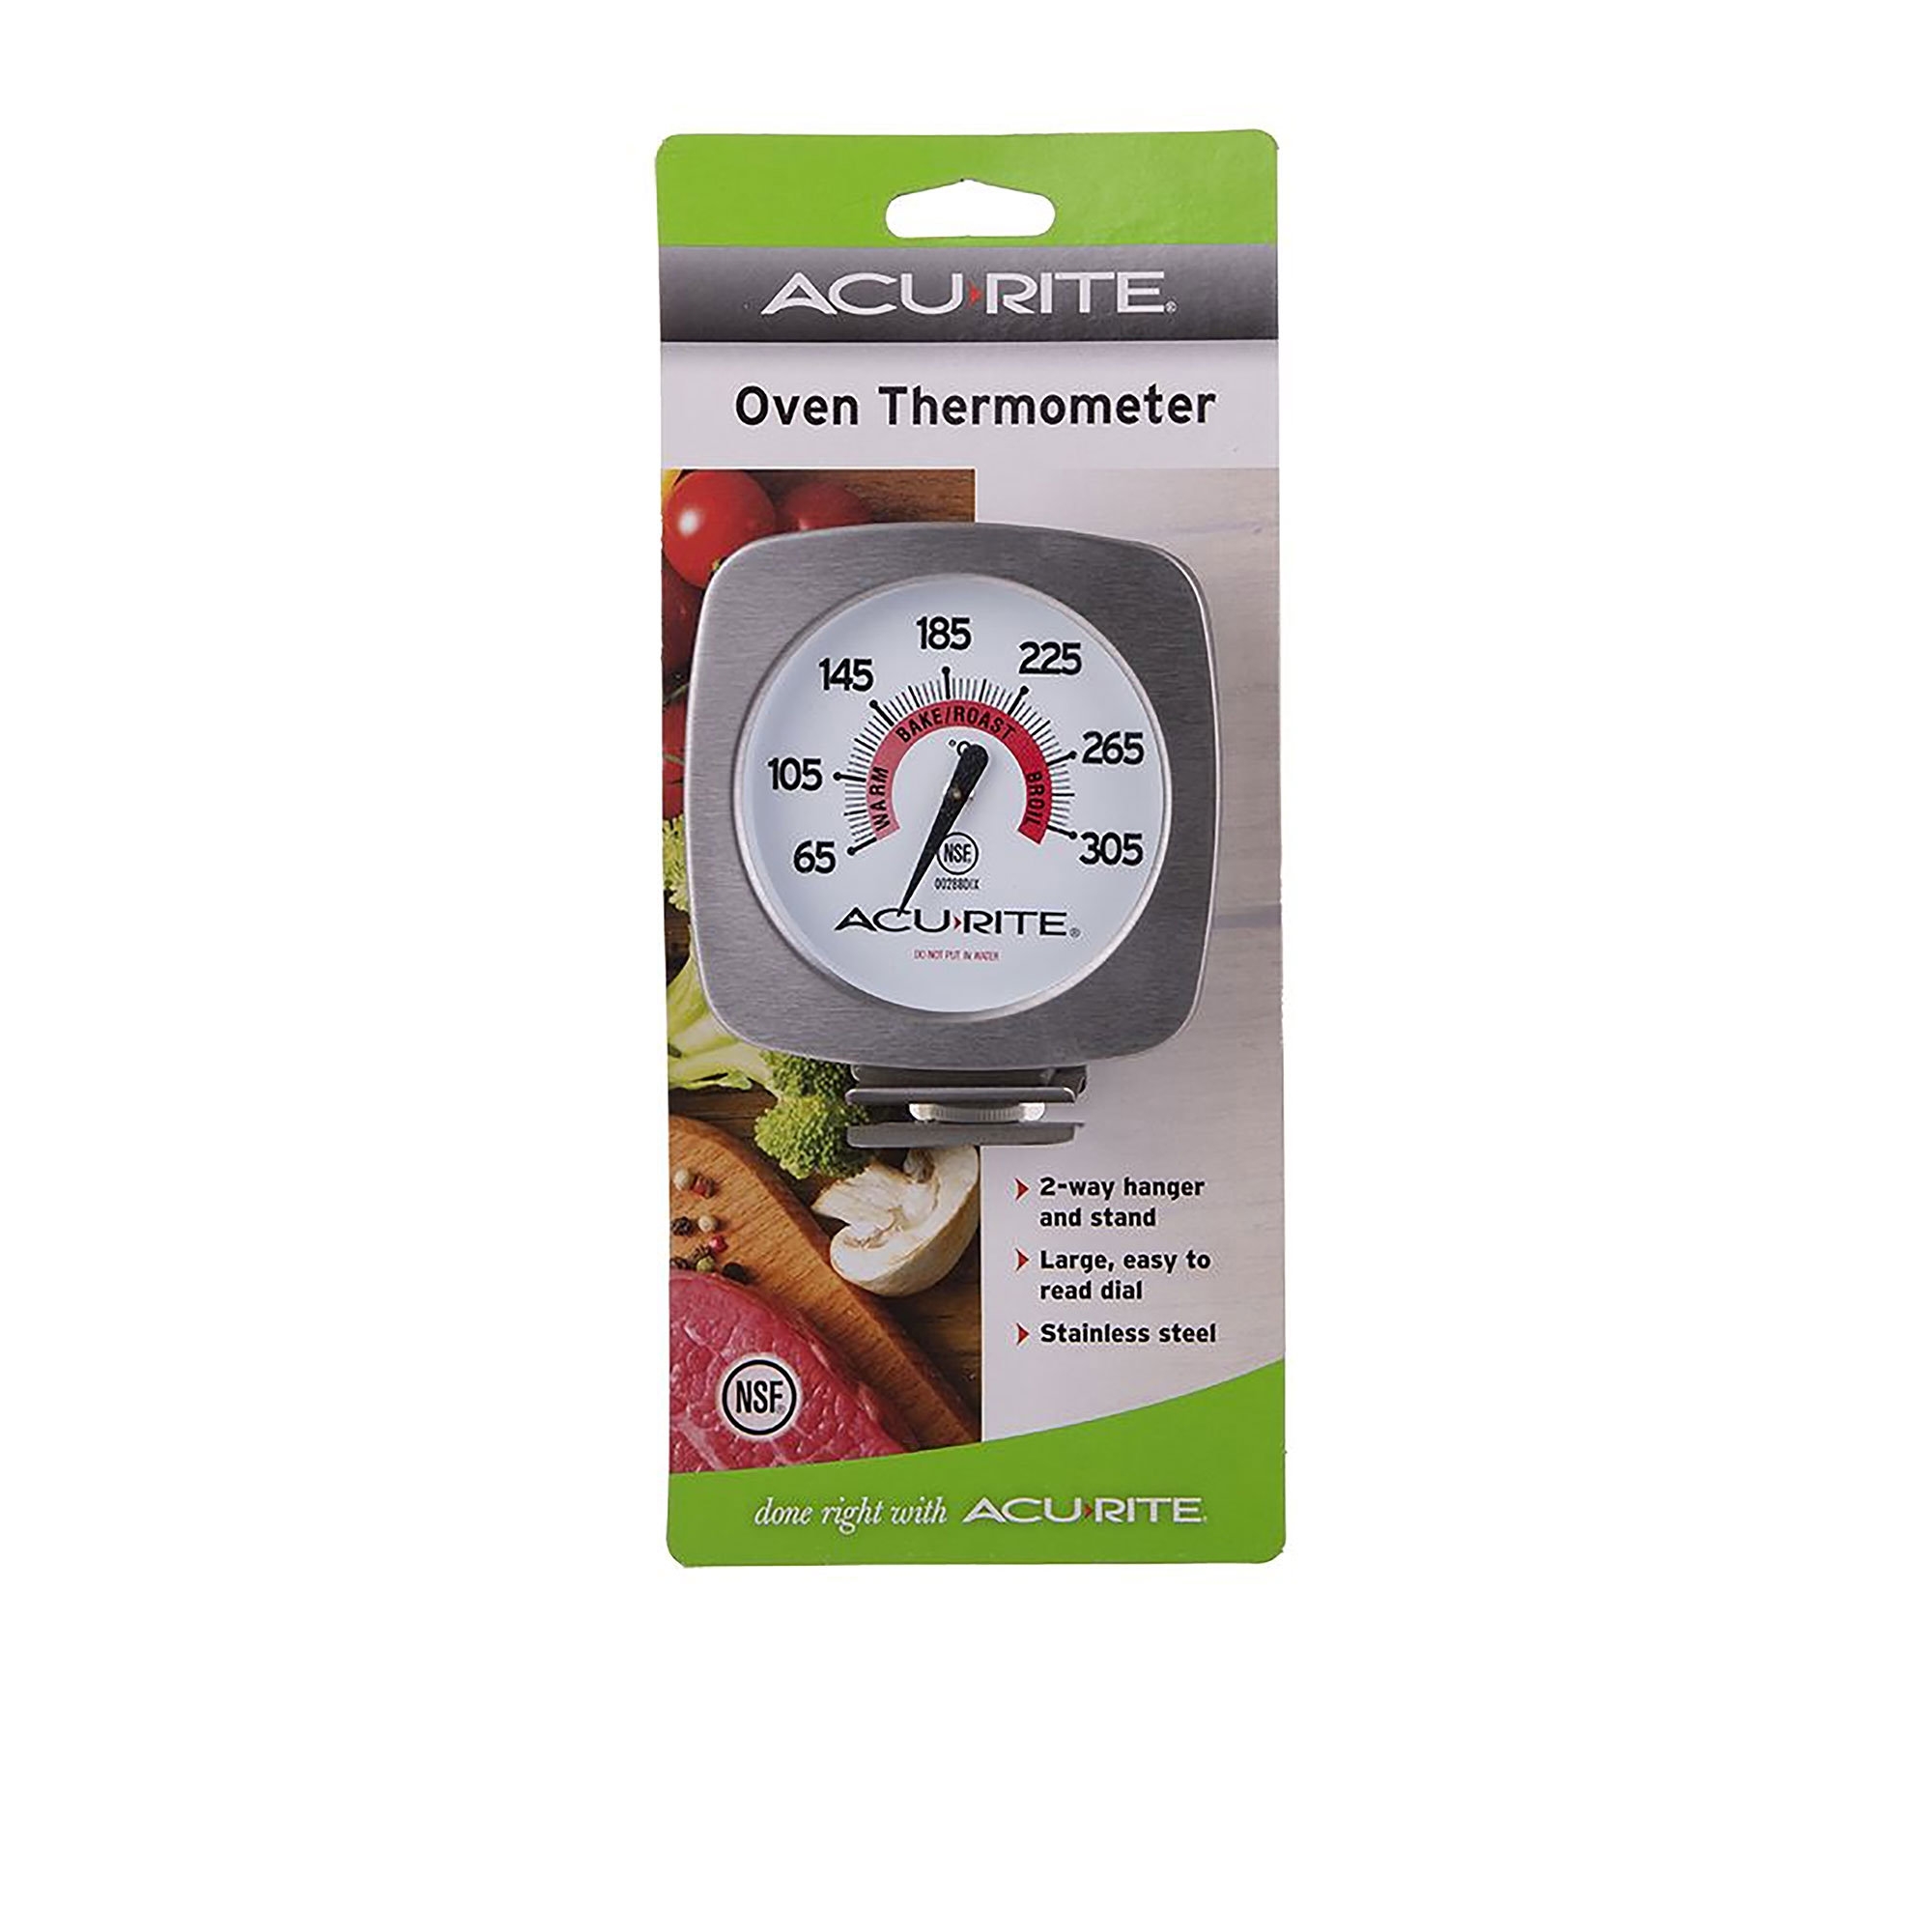 Acurite Gourmet Oven Thermometer Image 2